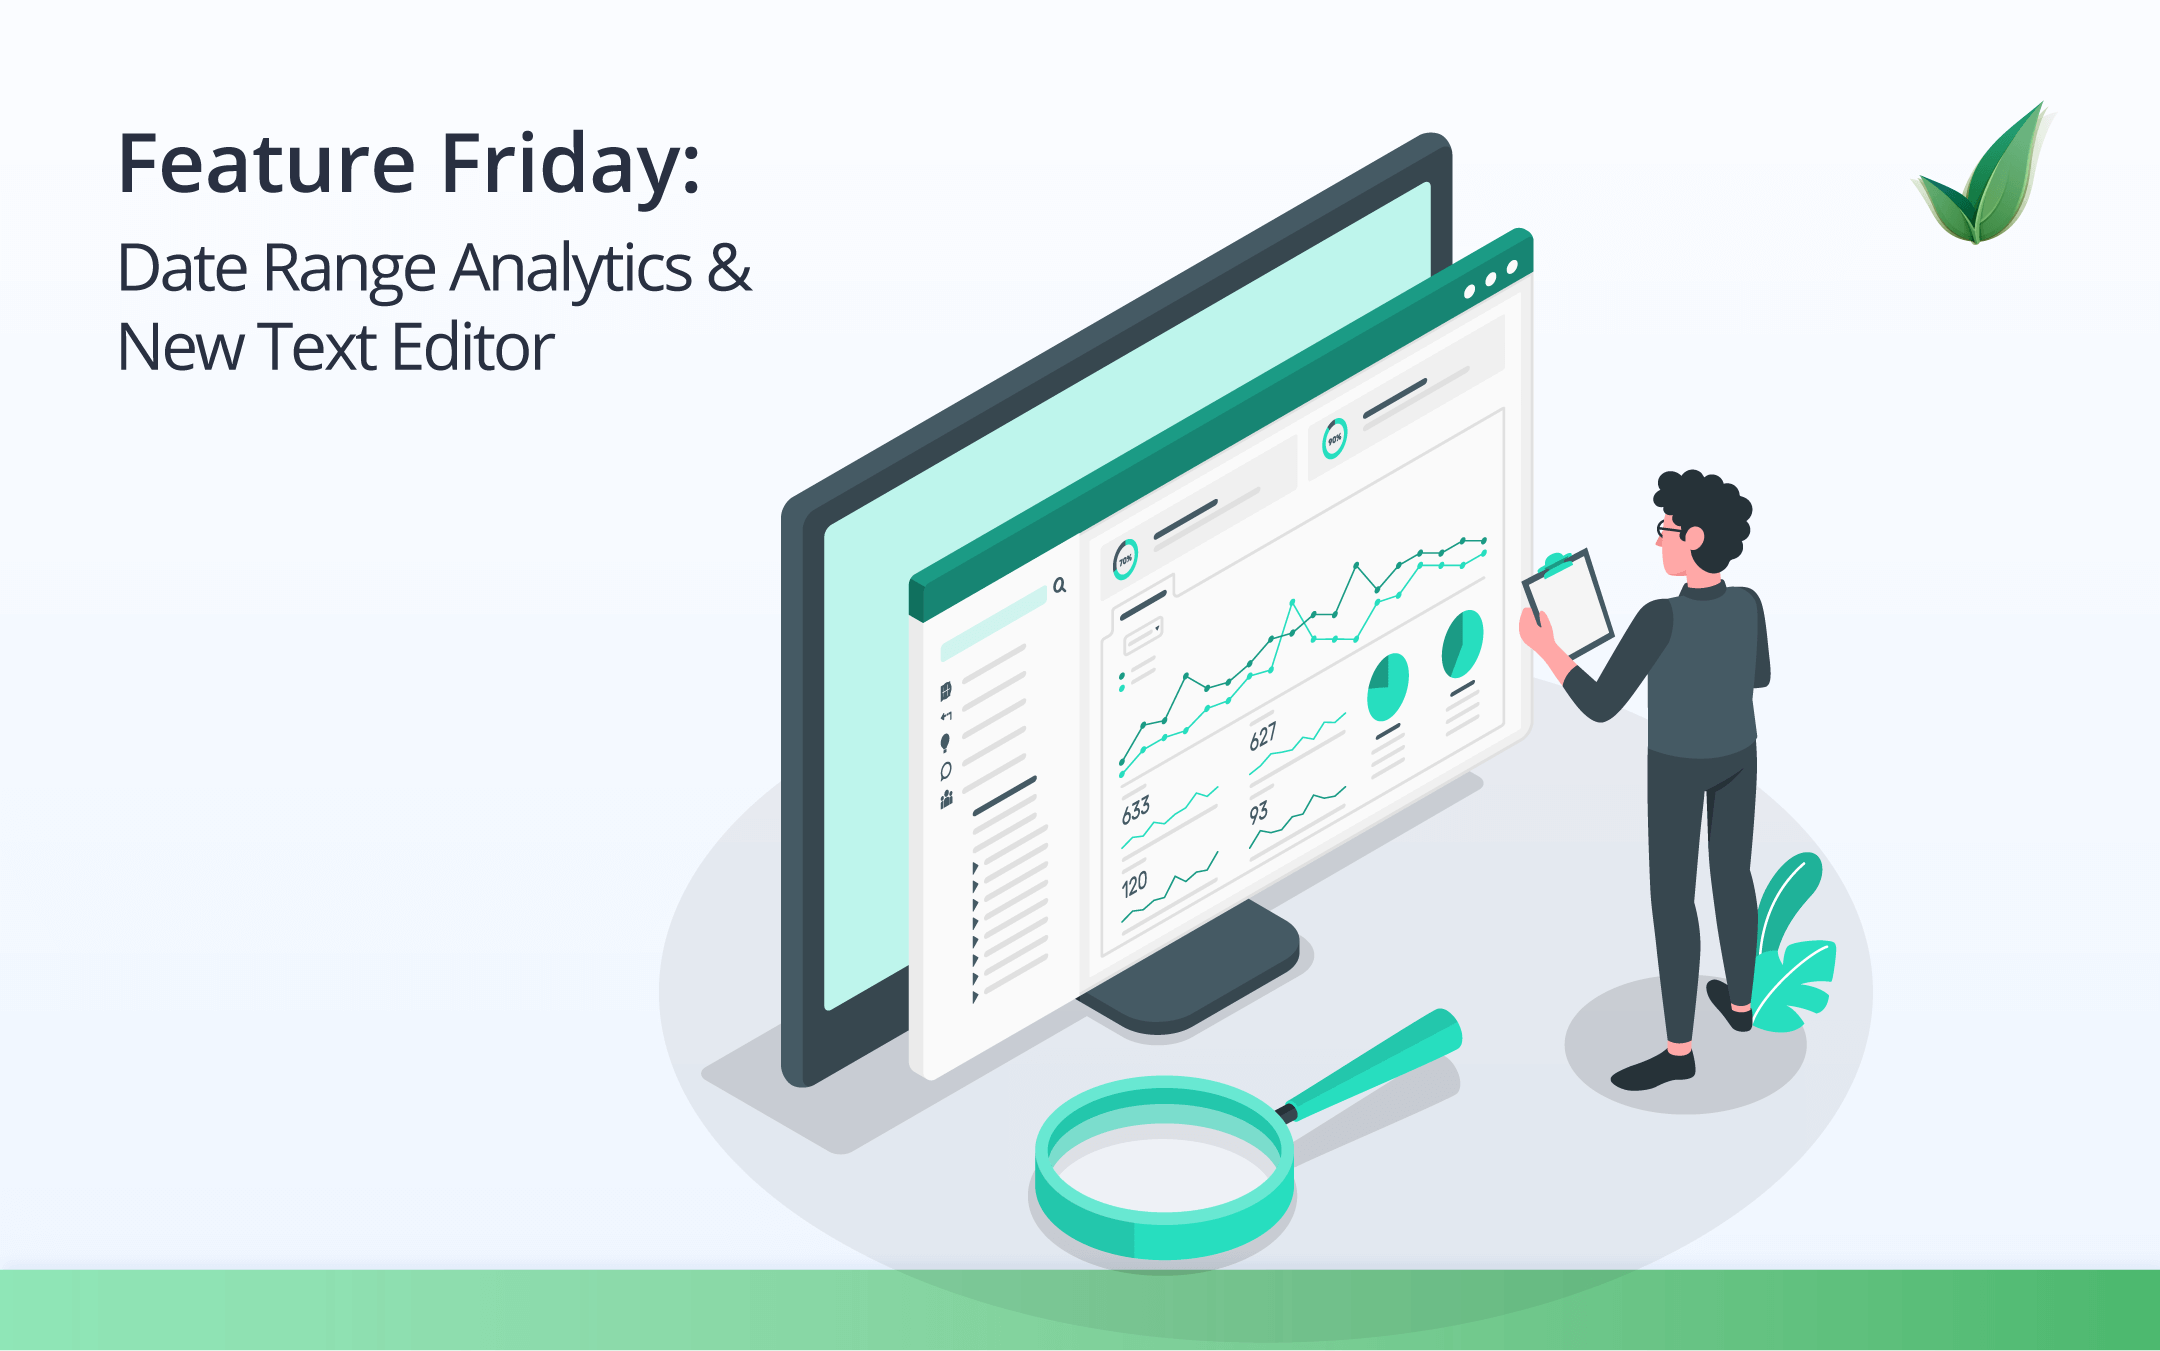 Feature Friday: Date Range Analytics and New Text Editor